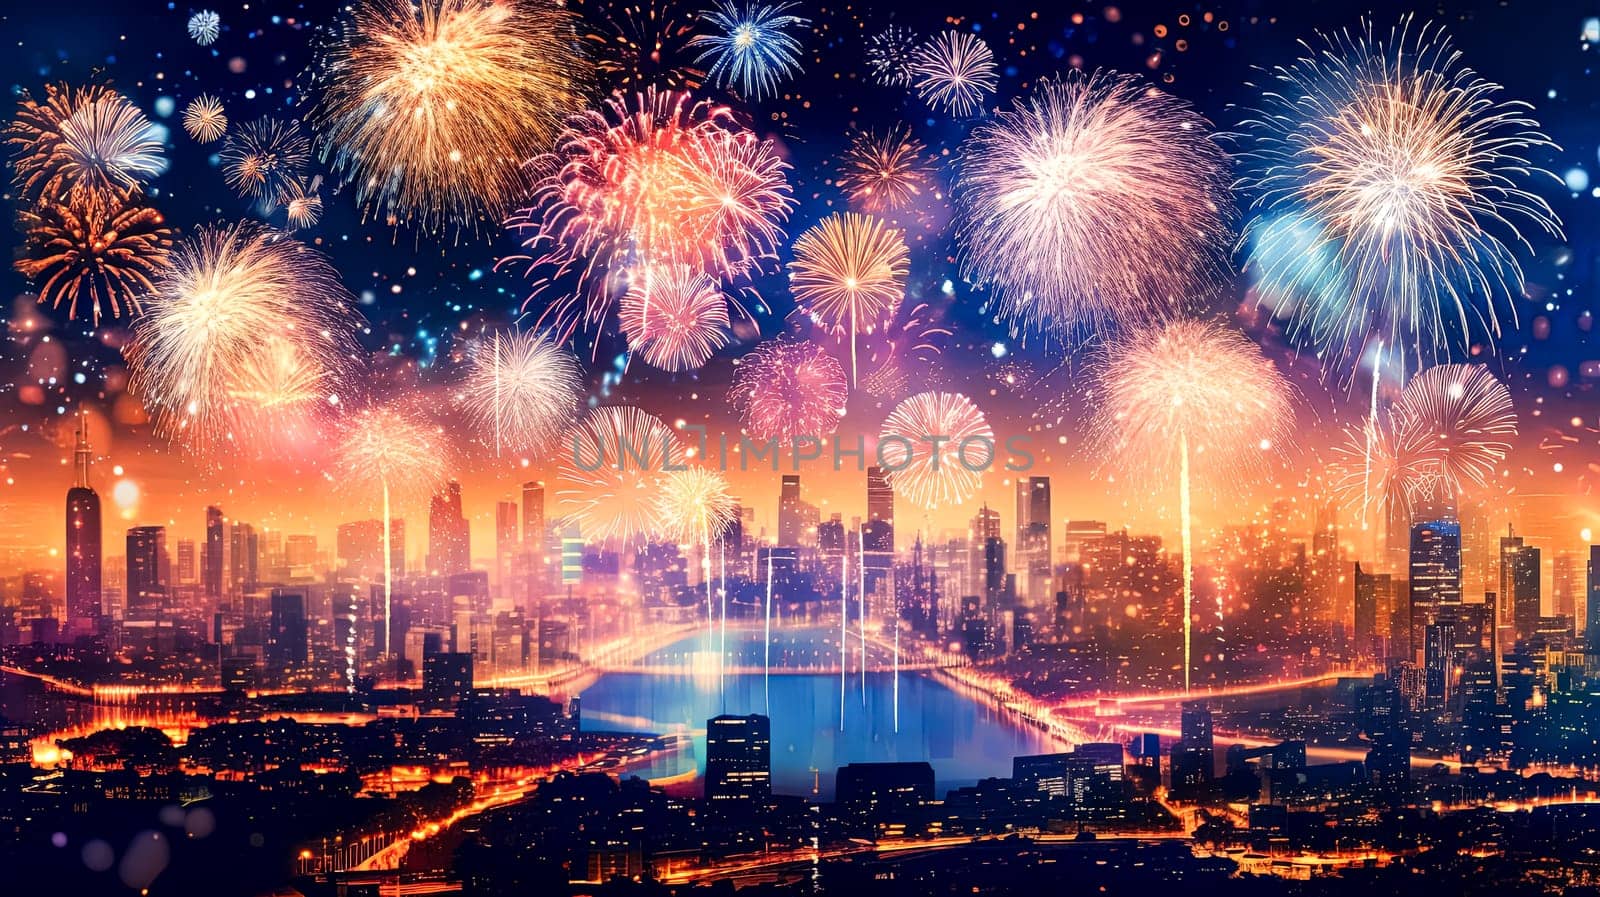 A city is lit up with fireworks and the sky is filled with bright colors. Scene is festive and celebratory